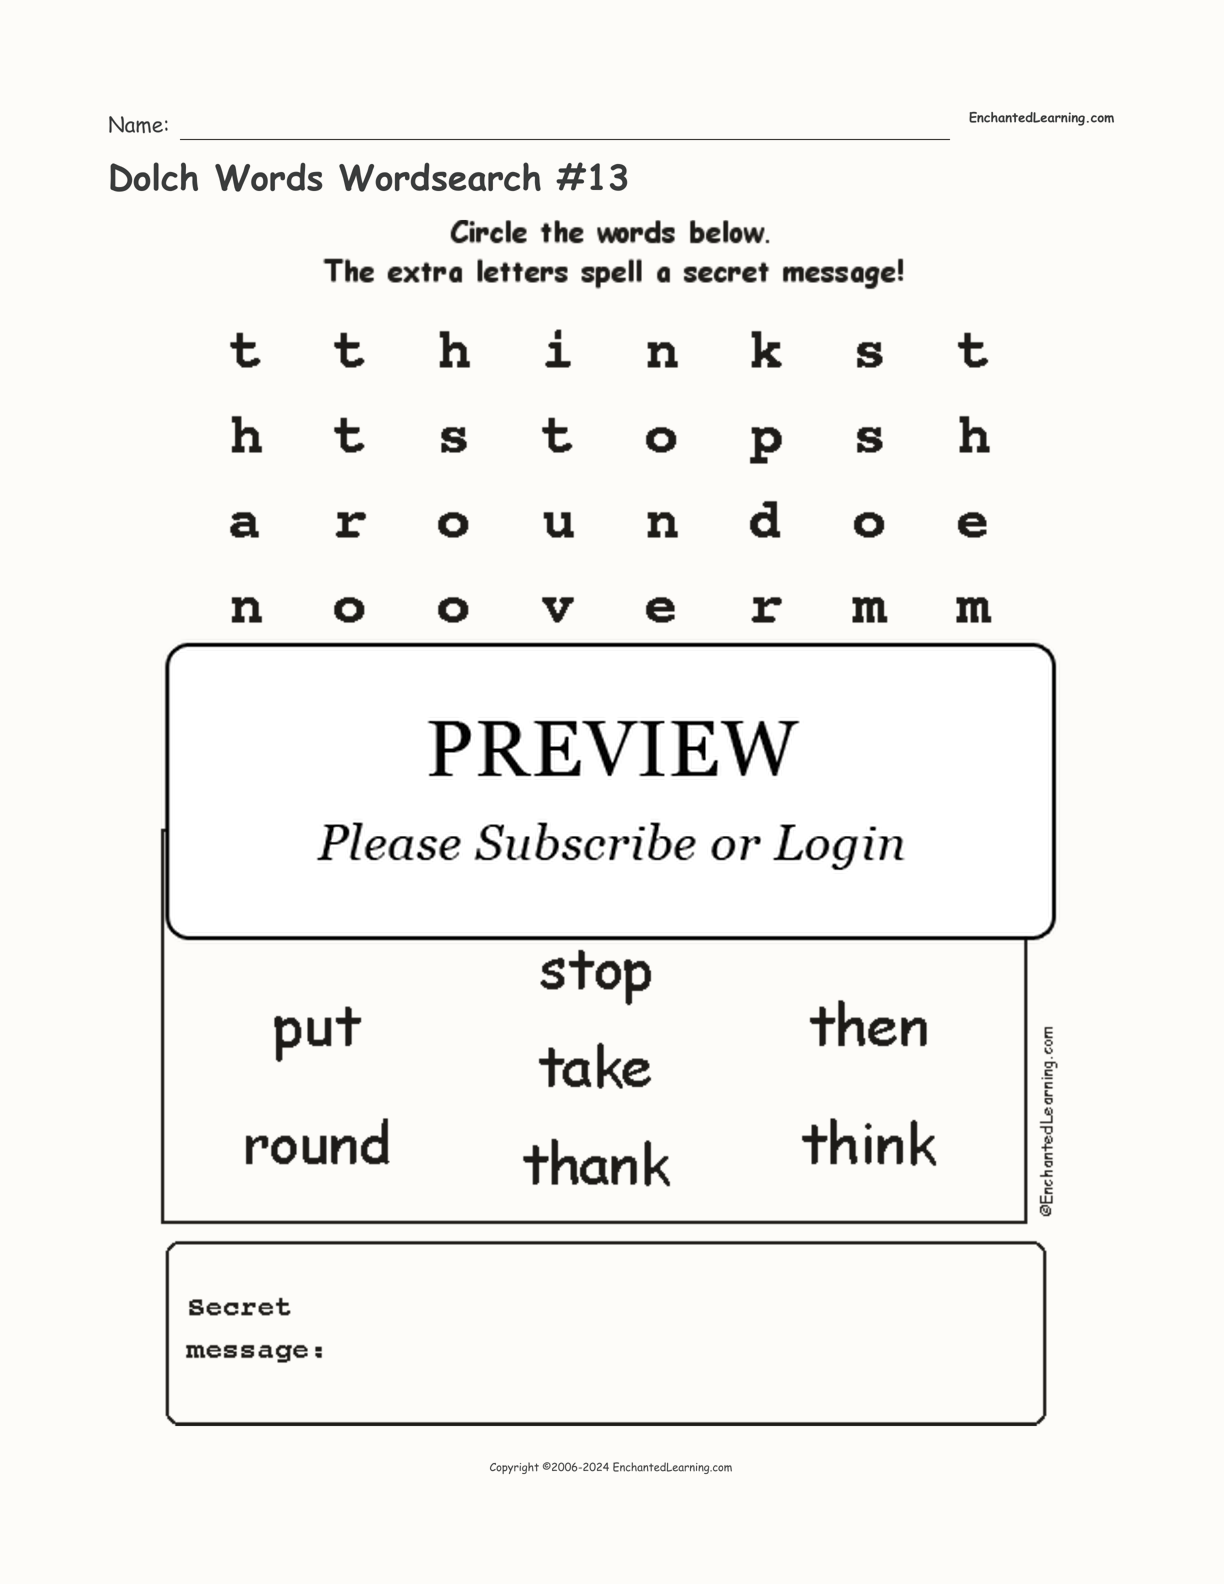 Dolch Words Wordsearch #13 interactive worksheet page 1